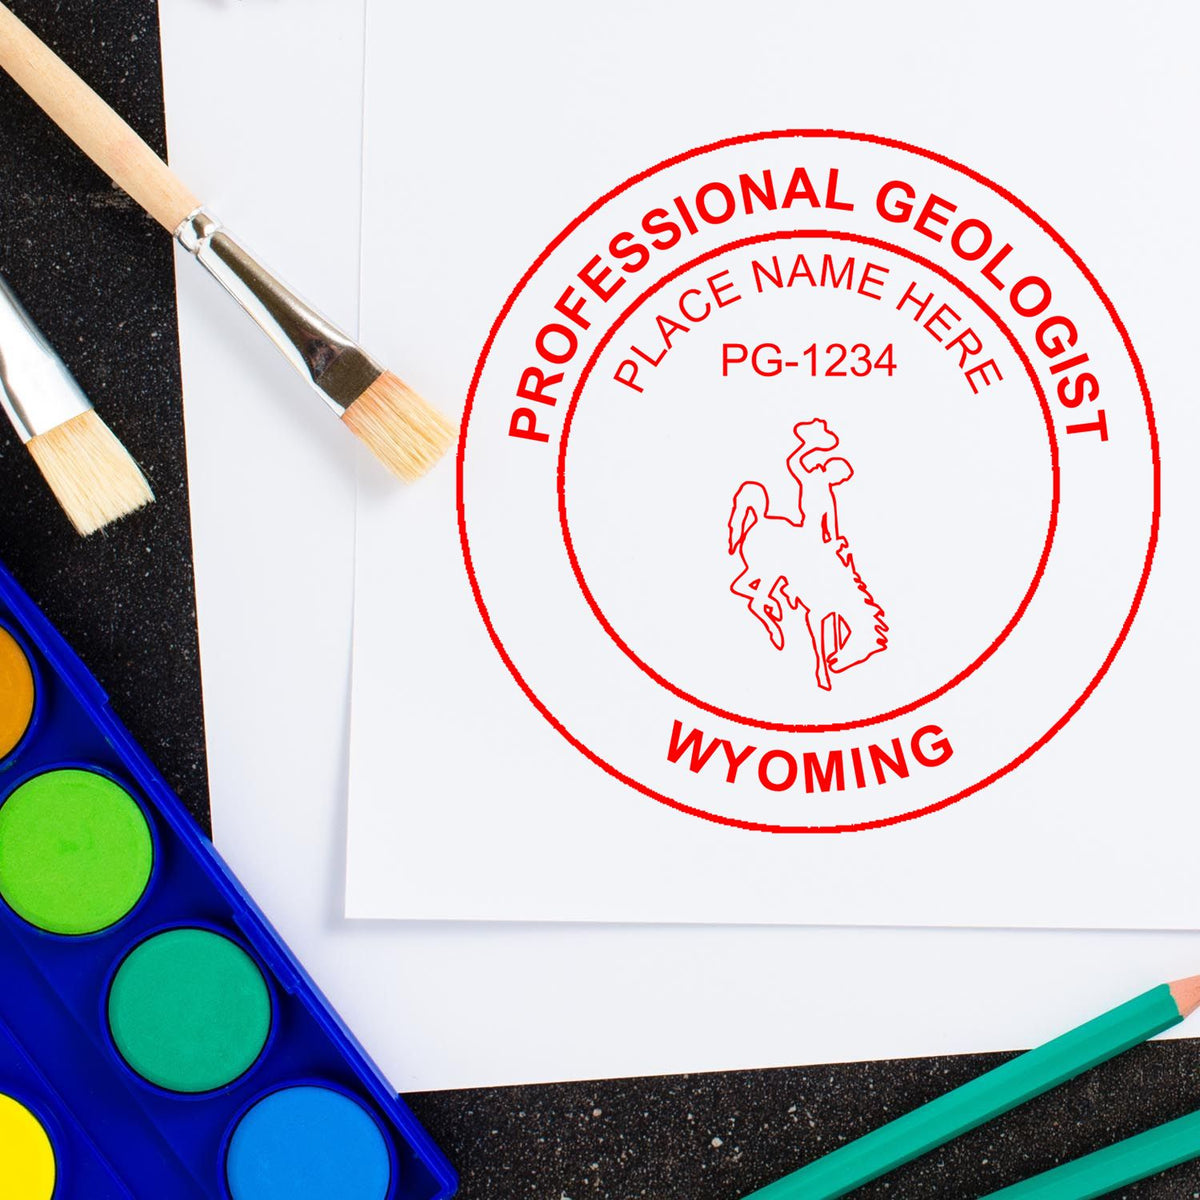 The Digital Wyoming Geologist Stamp, Electronic Seal for Wyoming Geologist stamp impression comes to life with a crisp, detailed image stamped on paper - showcasing true professional quality.